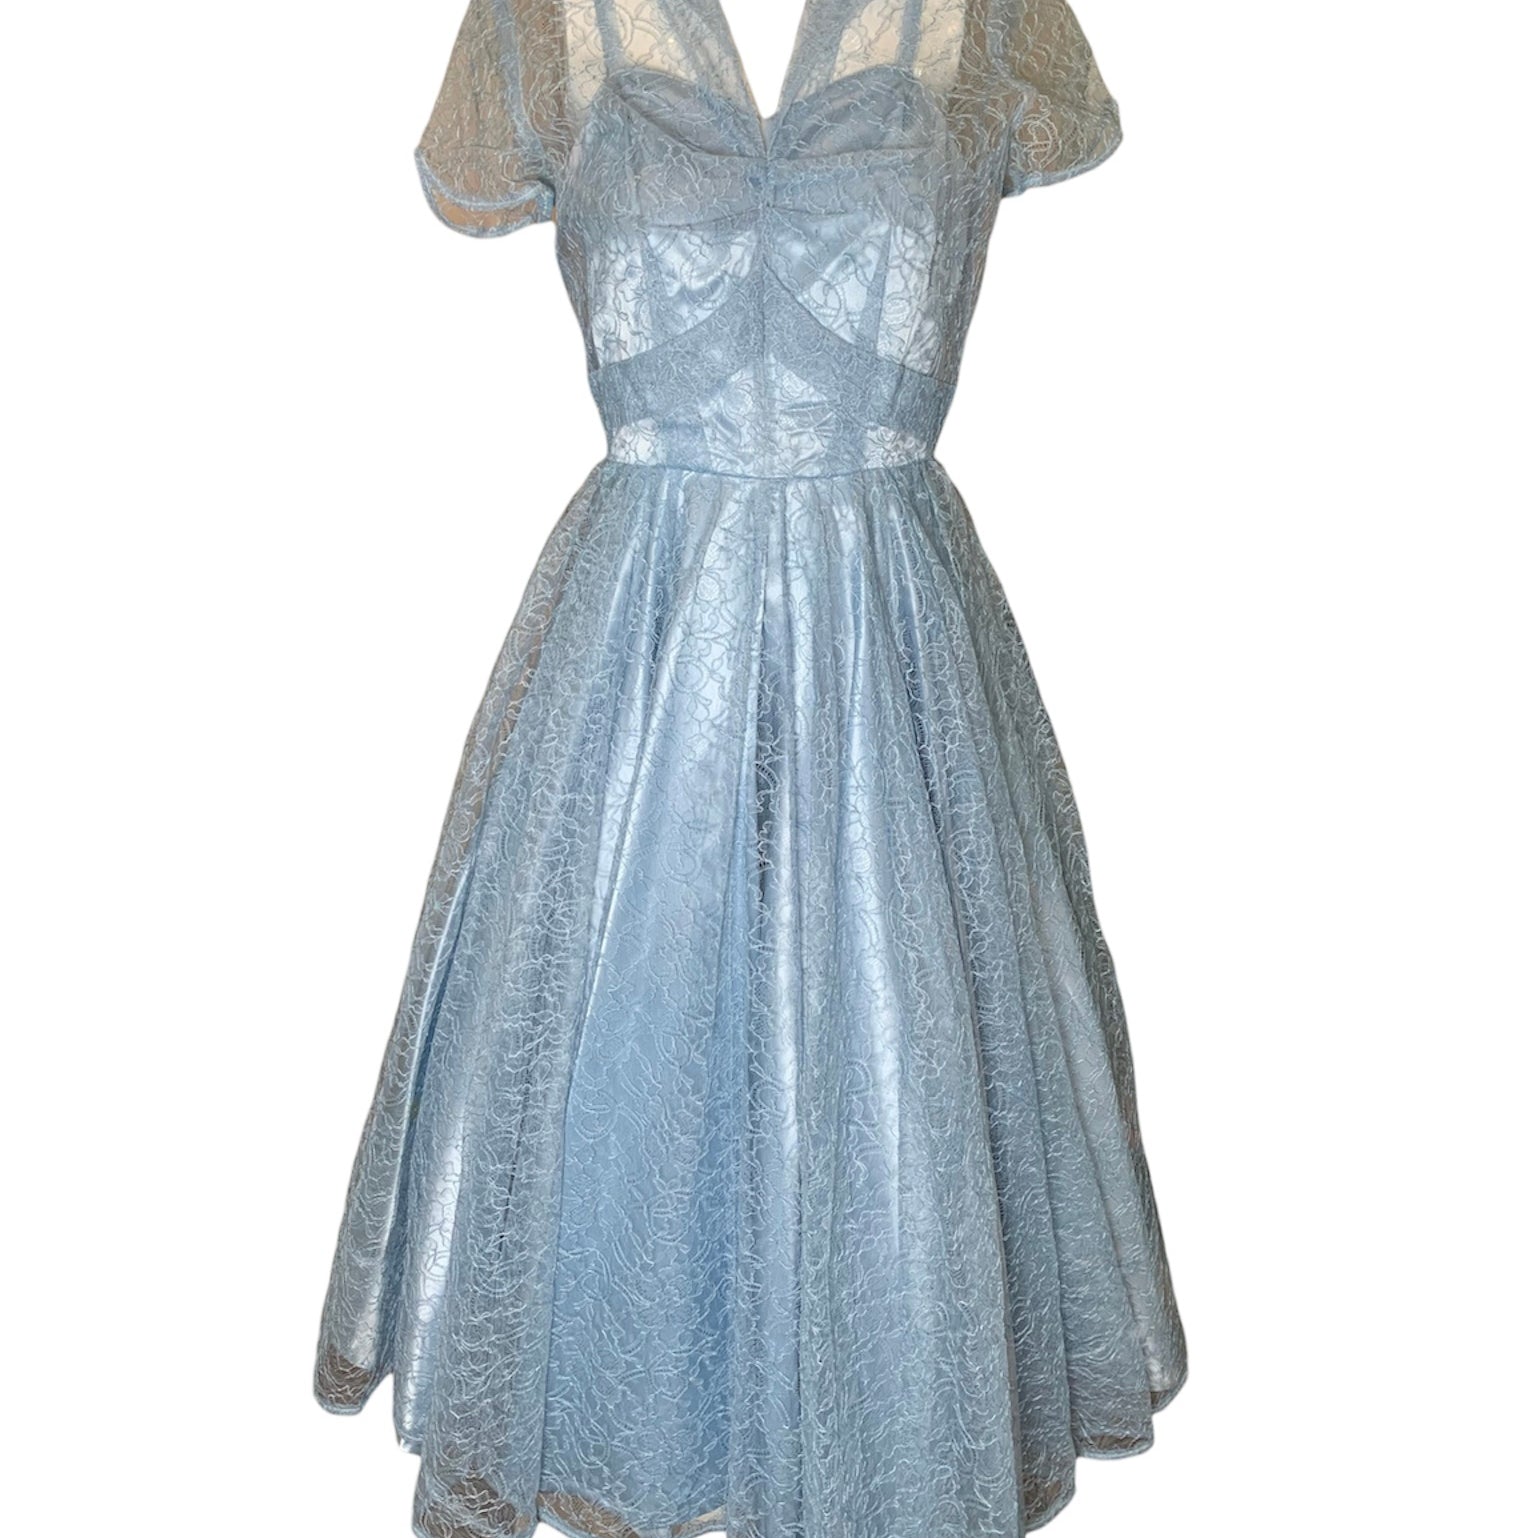  Ice Blue Lace and Satin Fit and Flare Party Dress FRONT 1 of 5